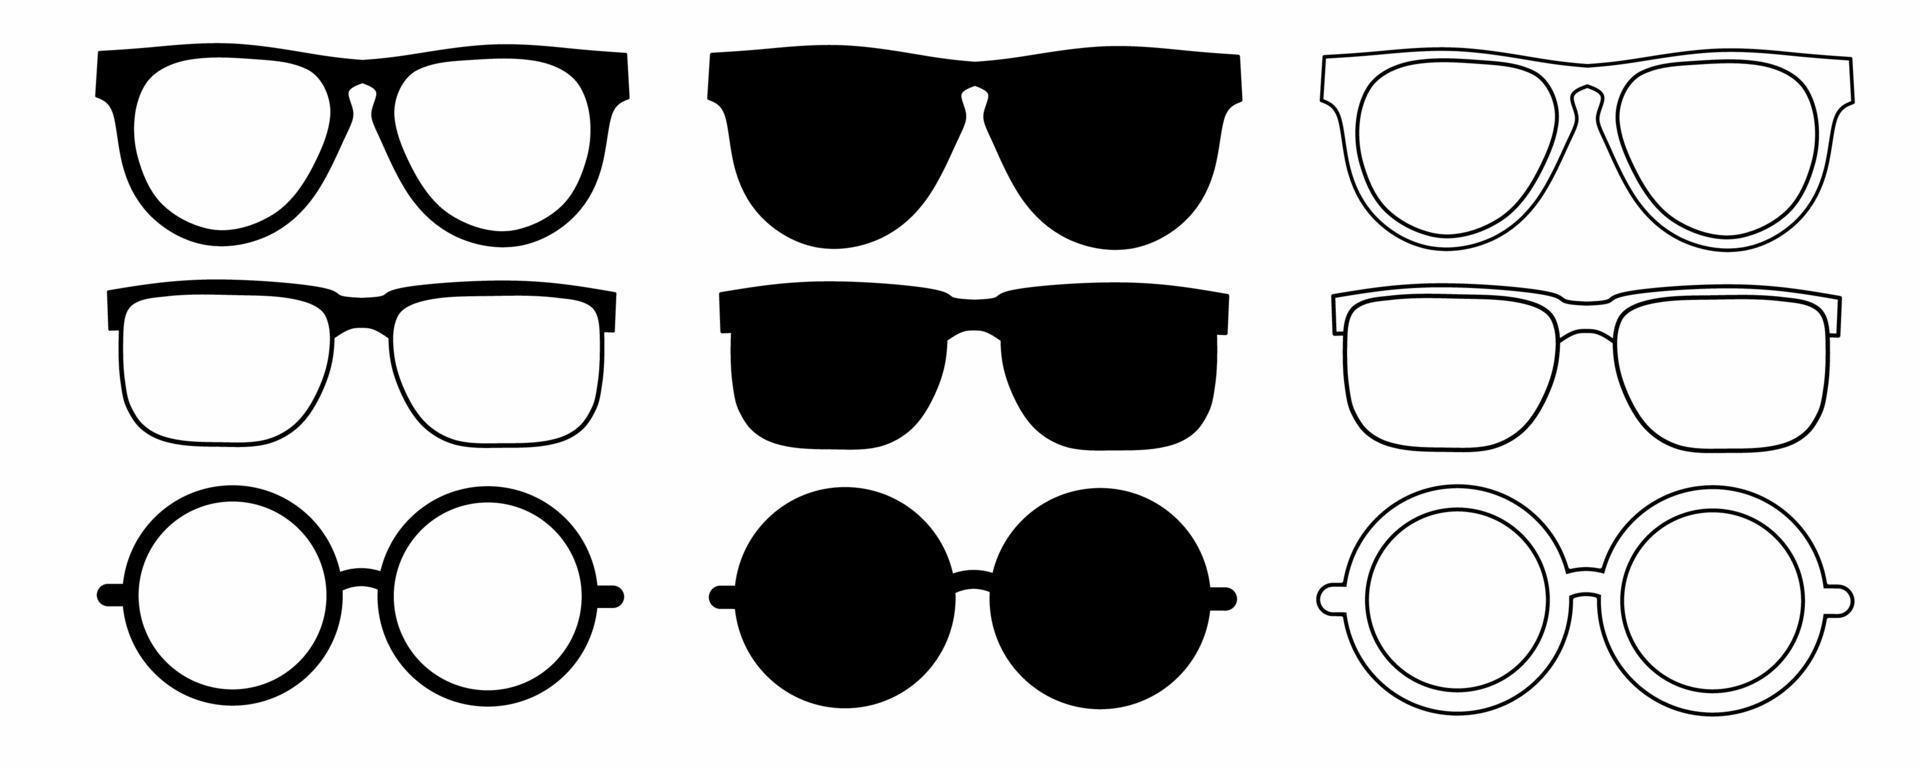 outline silhouette glasses icon set isolated on white background vector